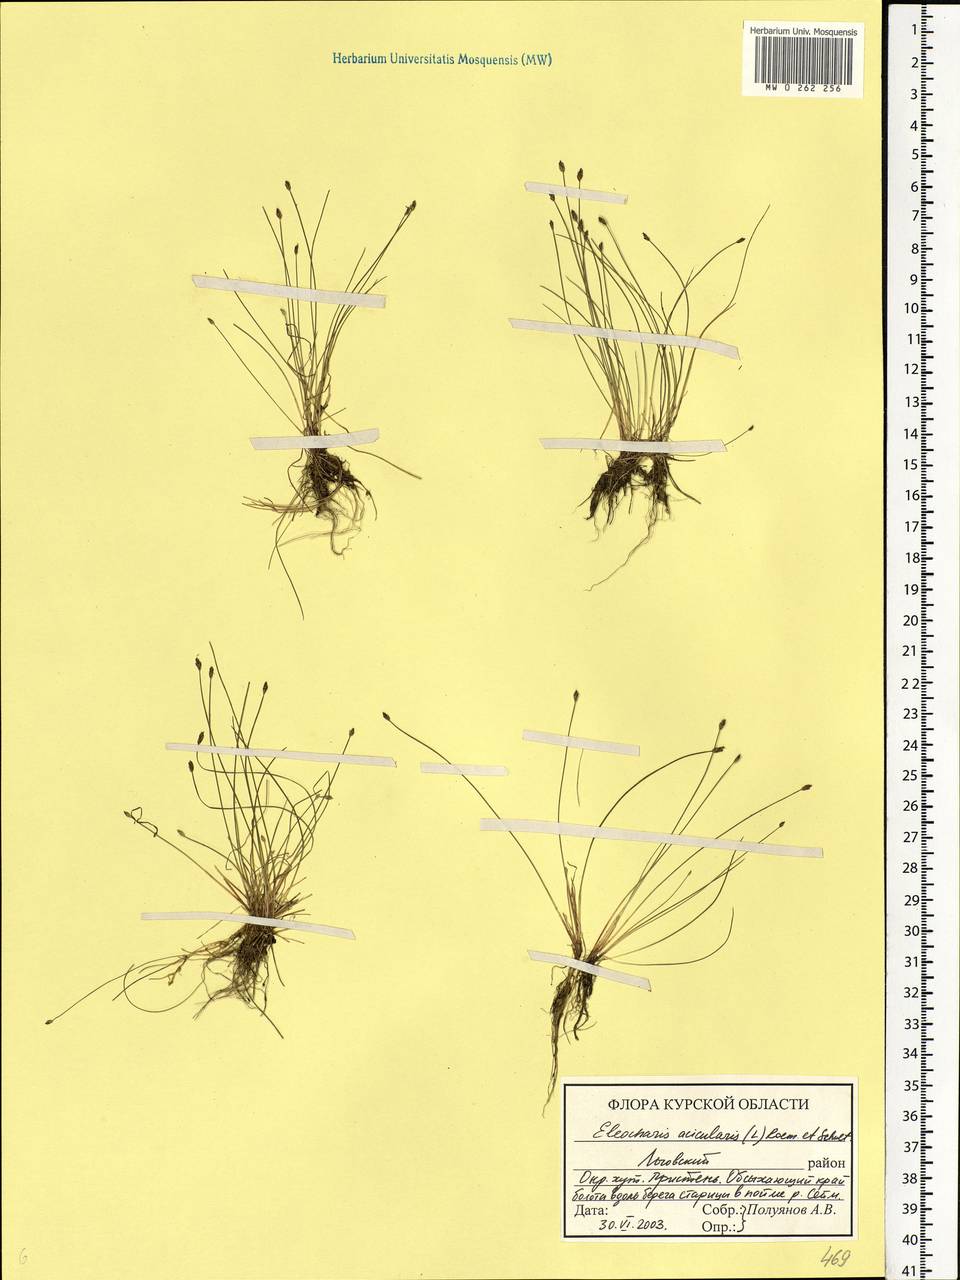 Eleocharis acicularis (L.) Roem. & Schult., Eastern Europe, Central forest-and-steppe region (E6) (Russia)